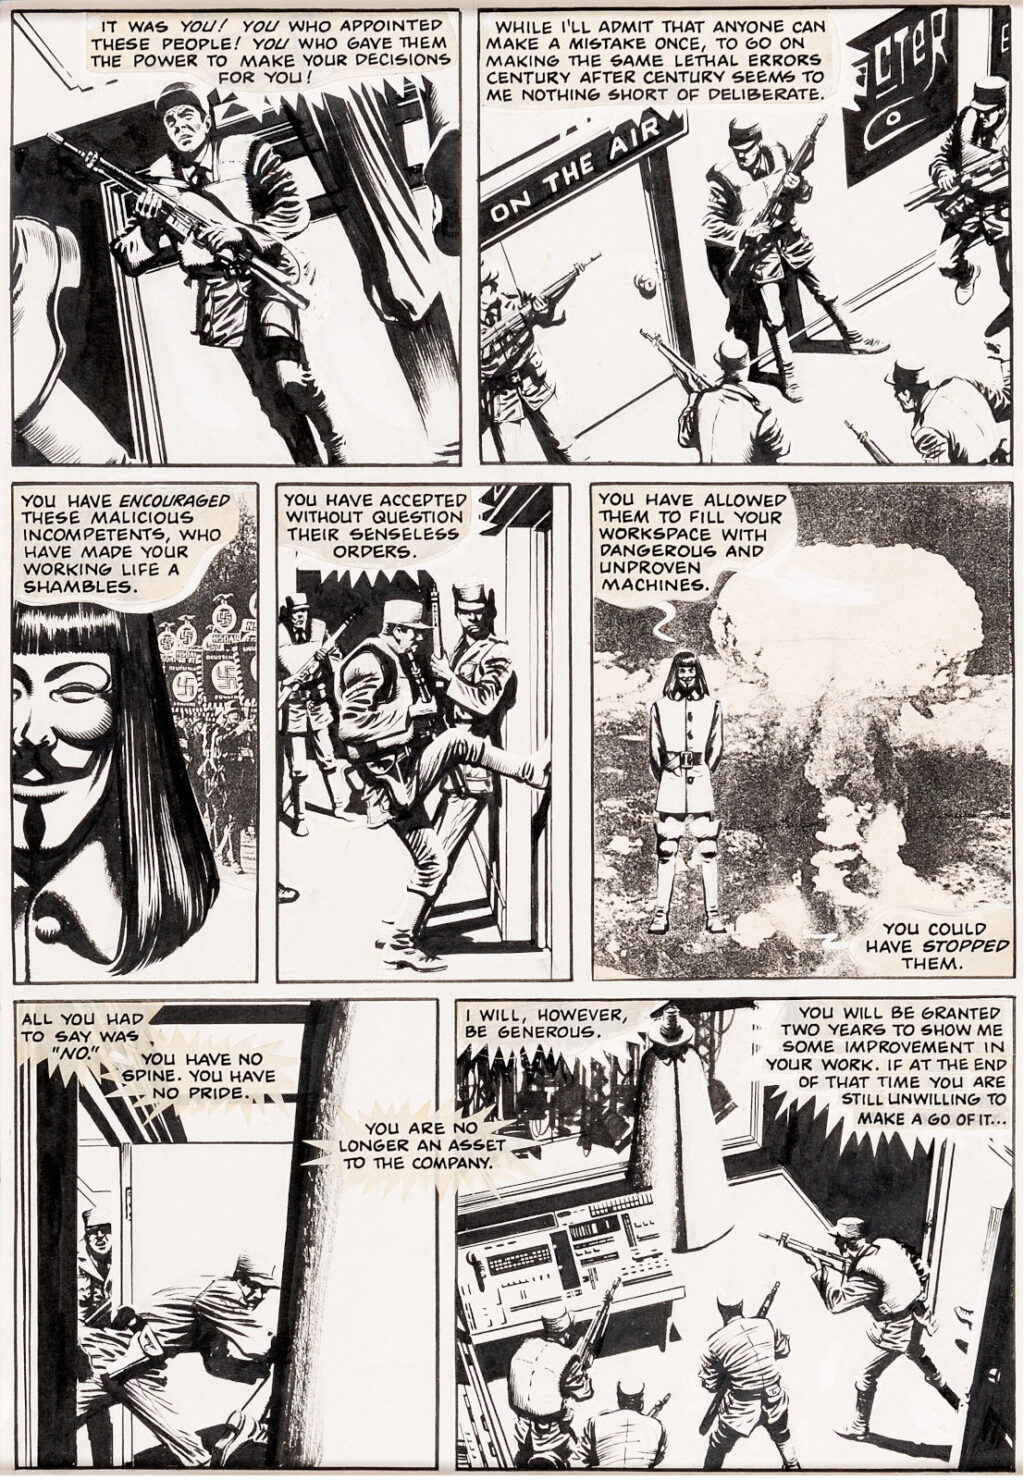 Warrior issue 16 V For Vendetta page 5 by David Lloyd